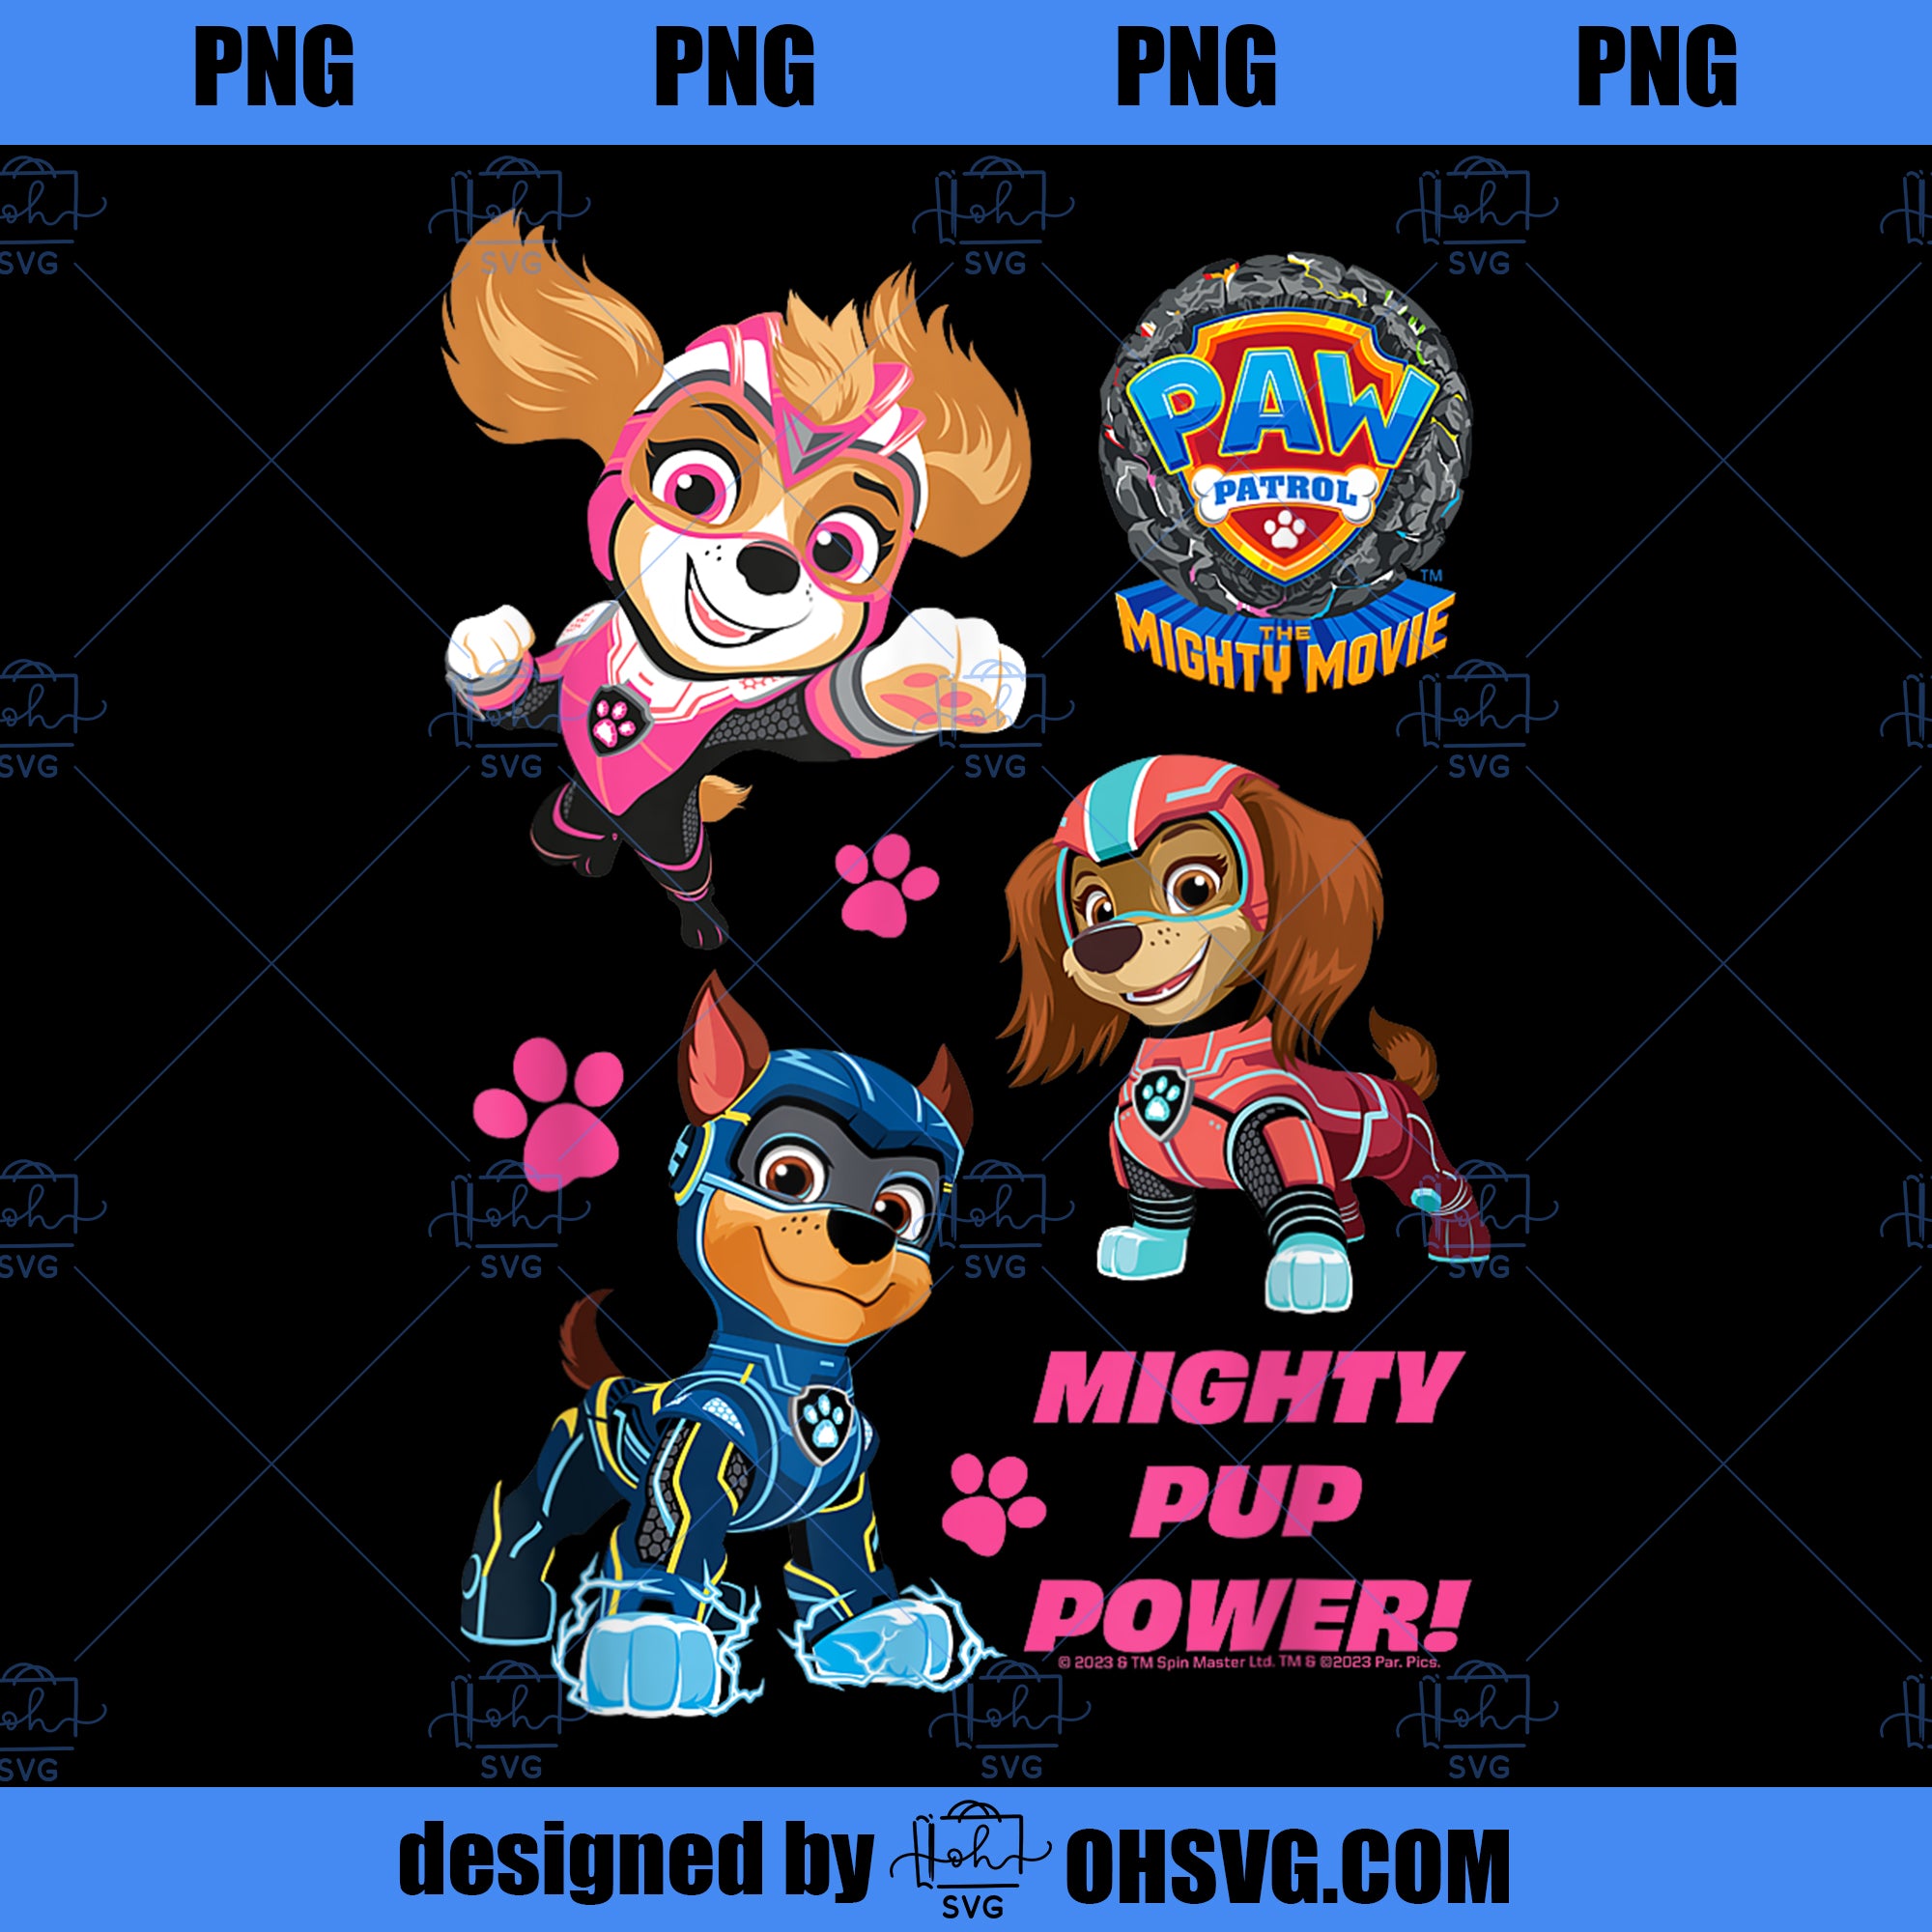 PAW Patrol The Mighty Movie Mighty Pup Power PNG, Movies PNG, PAW Patrol  PNG